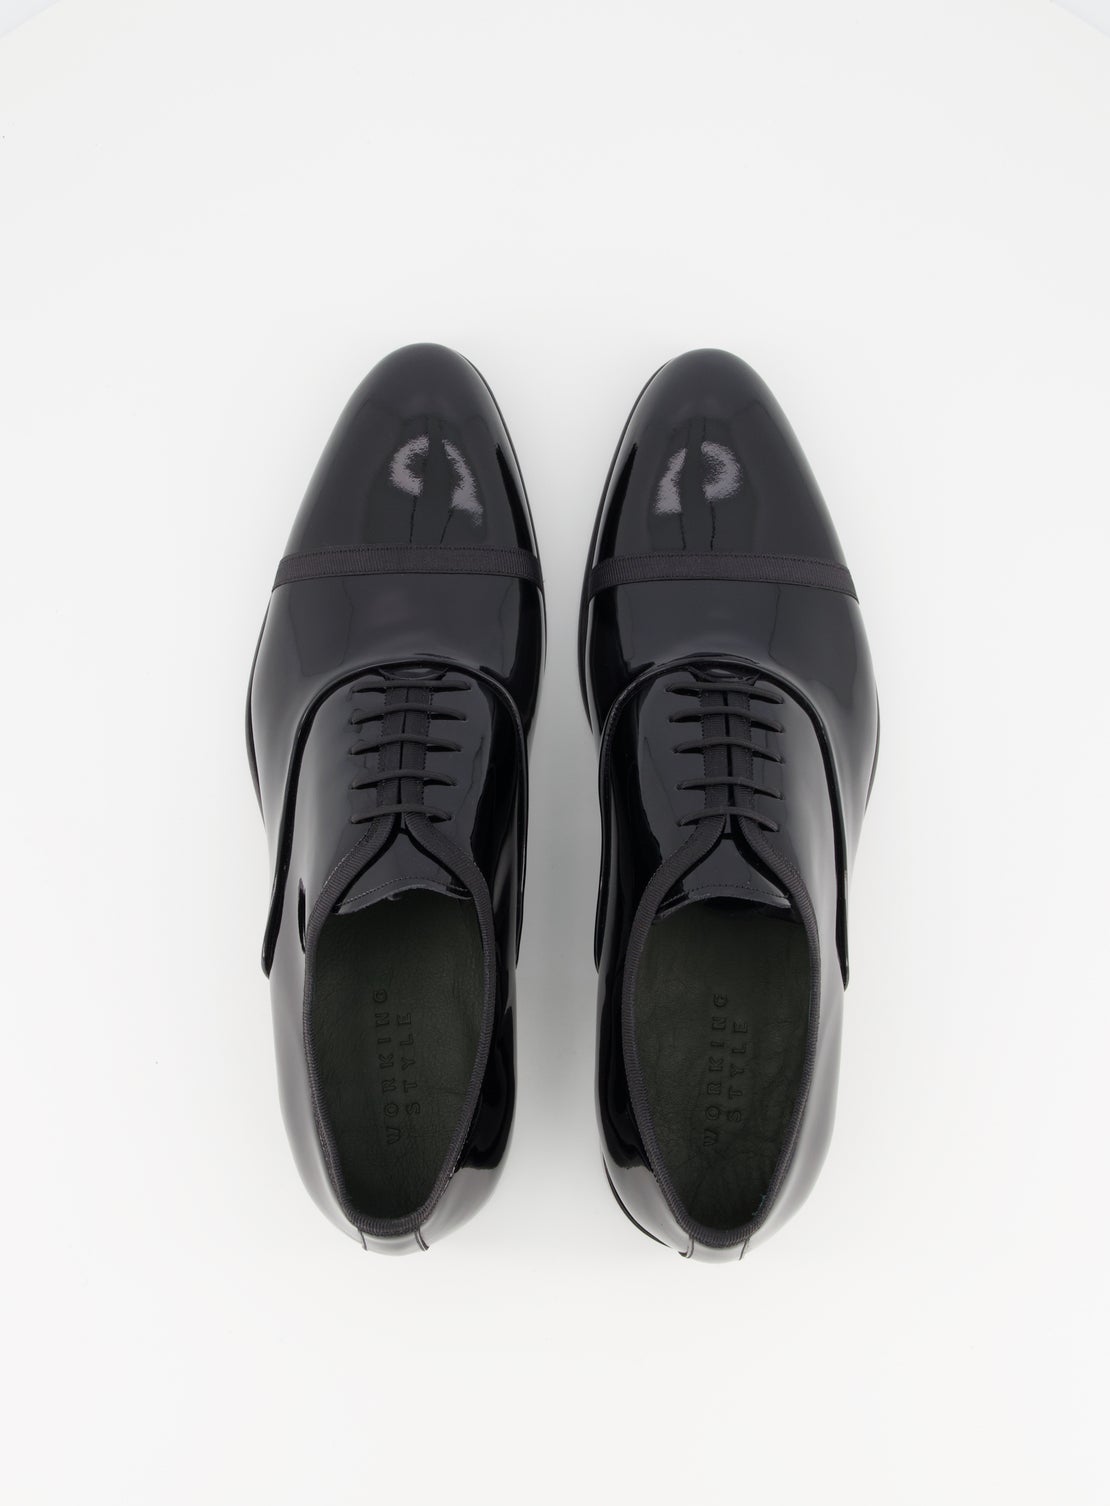 Stewart Black Patent leather Dinner Shoes